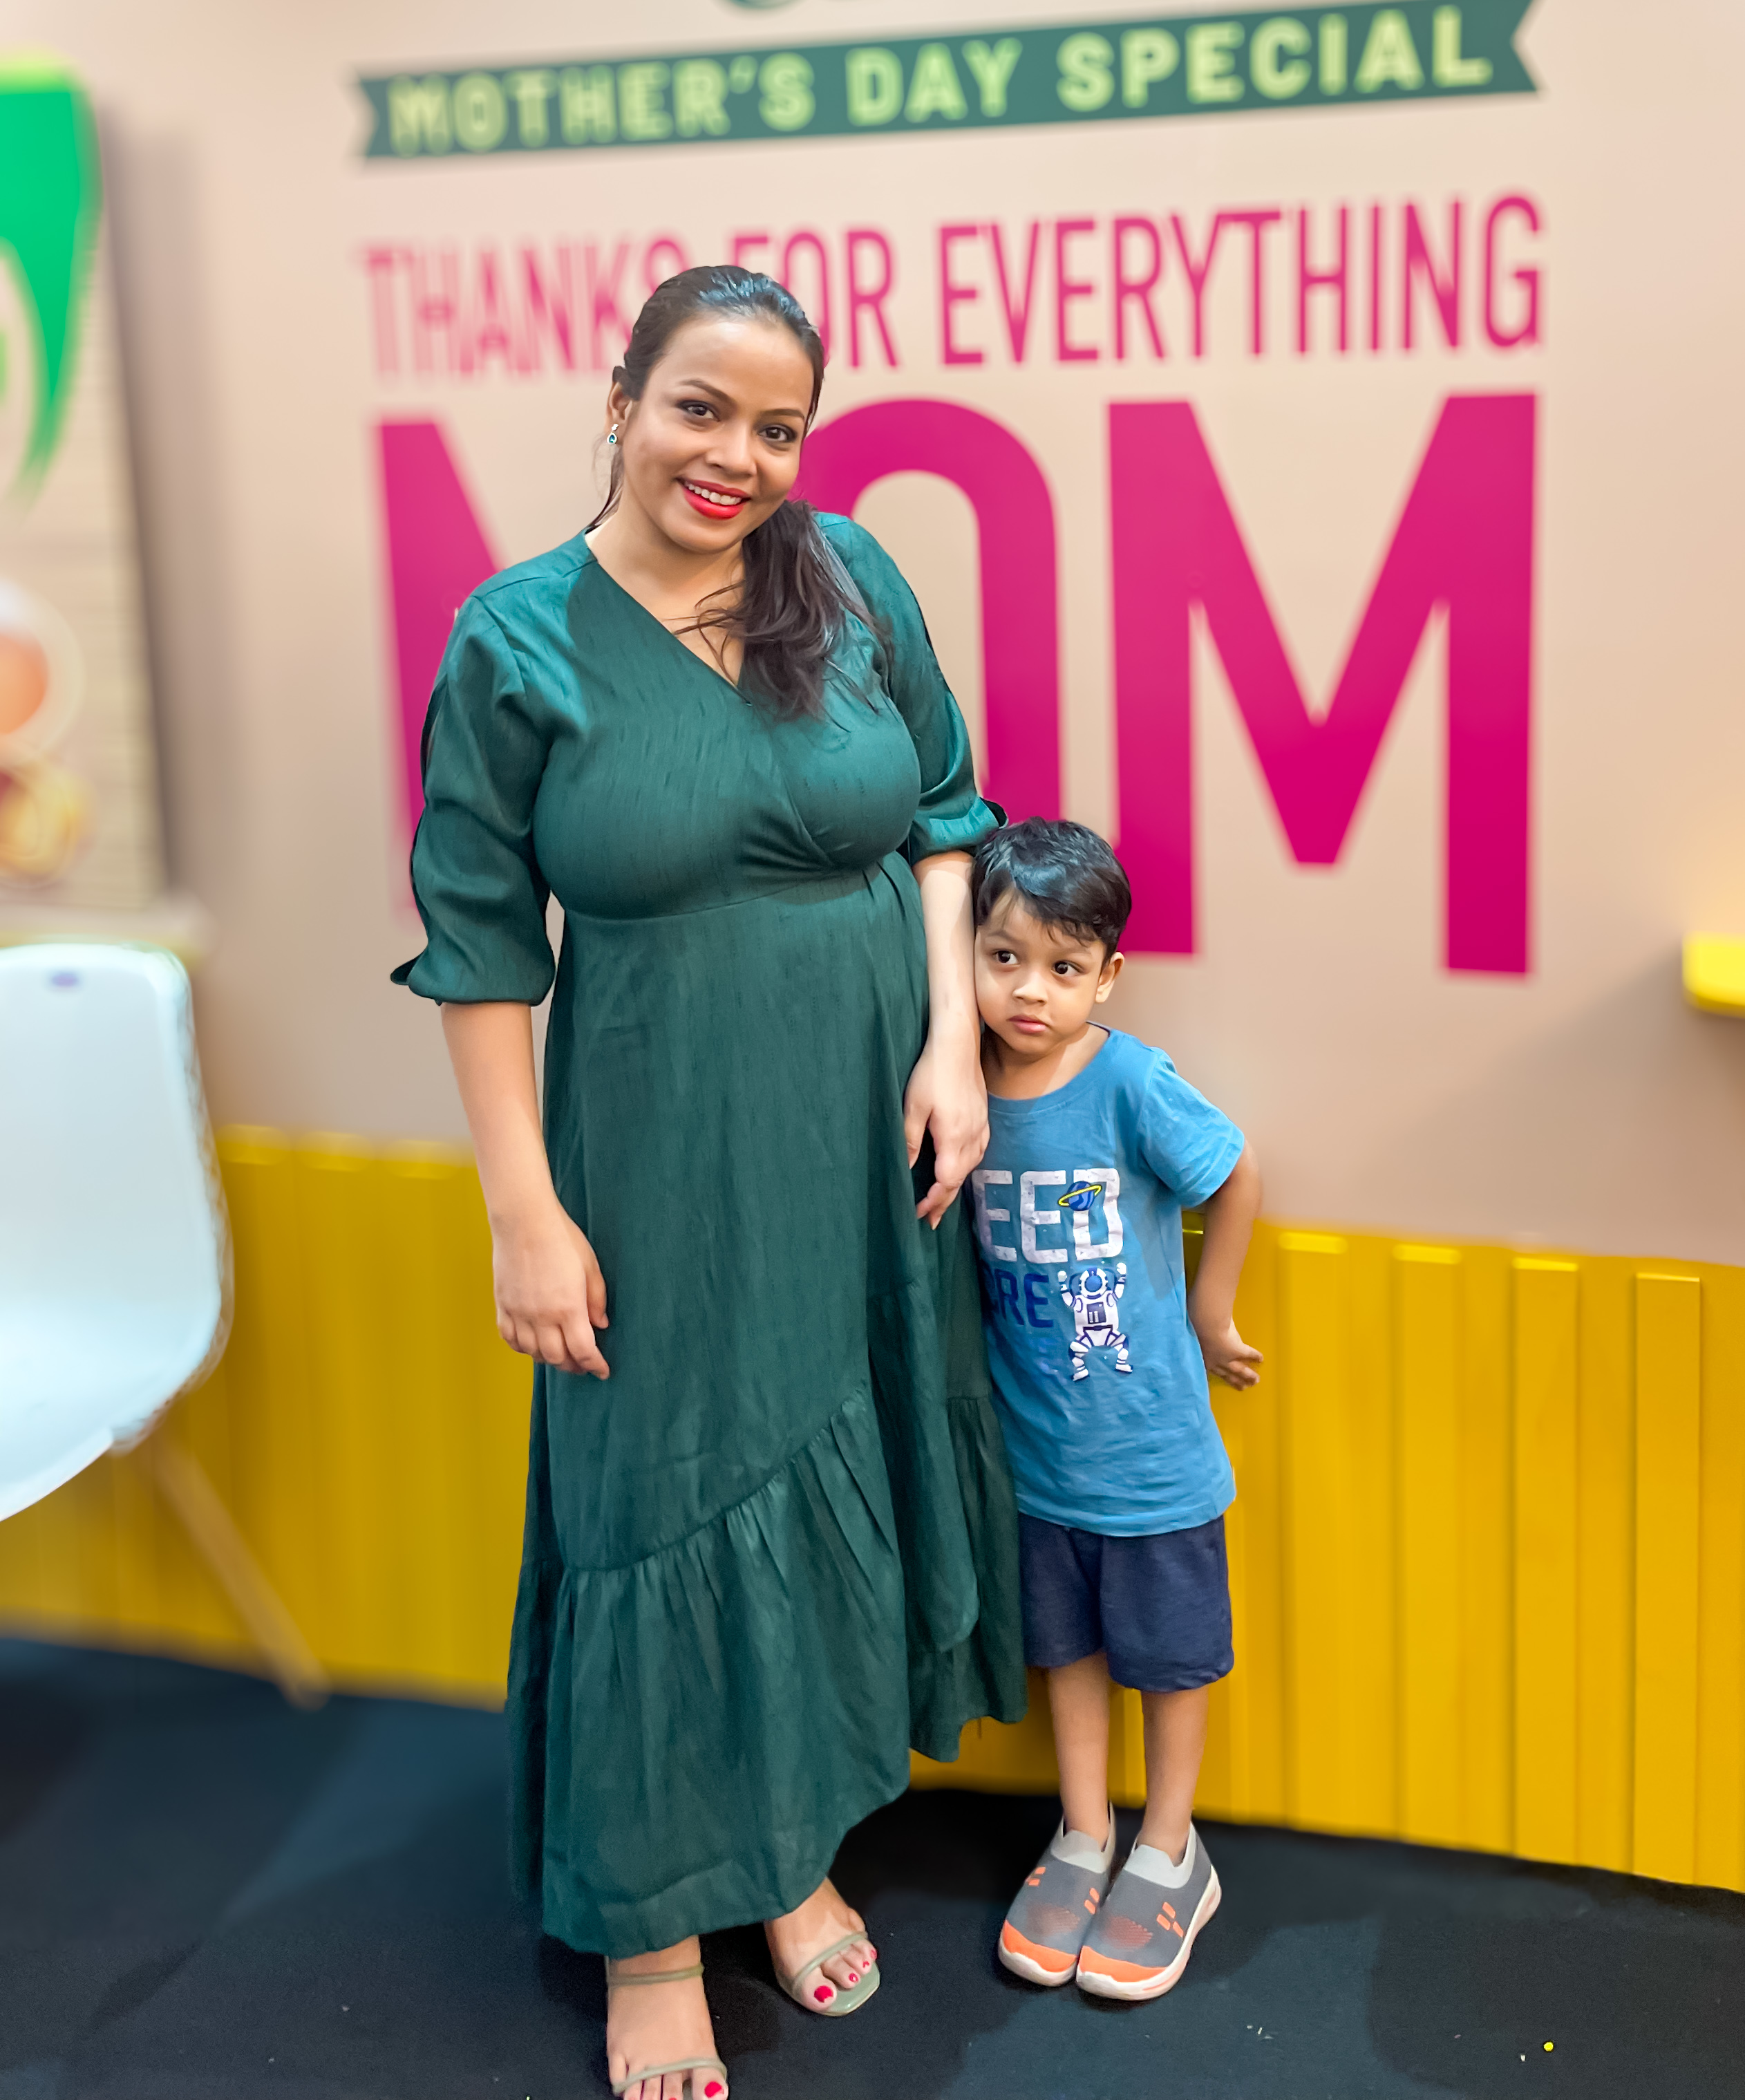 The Mom Store: A New Mom’s Paradise